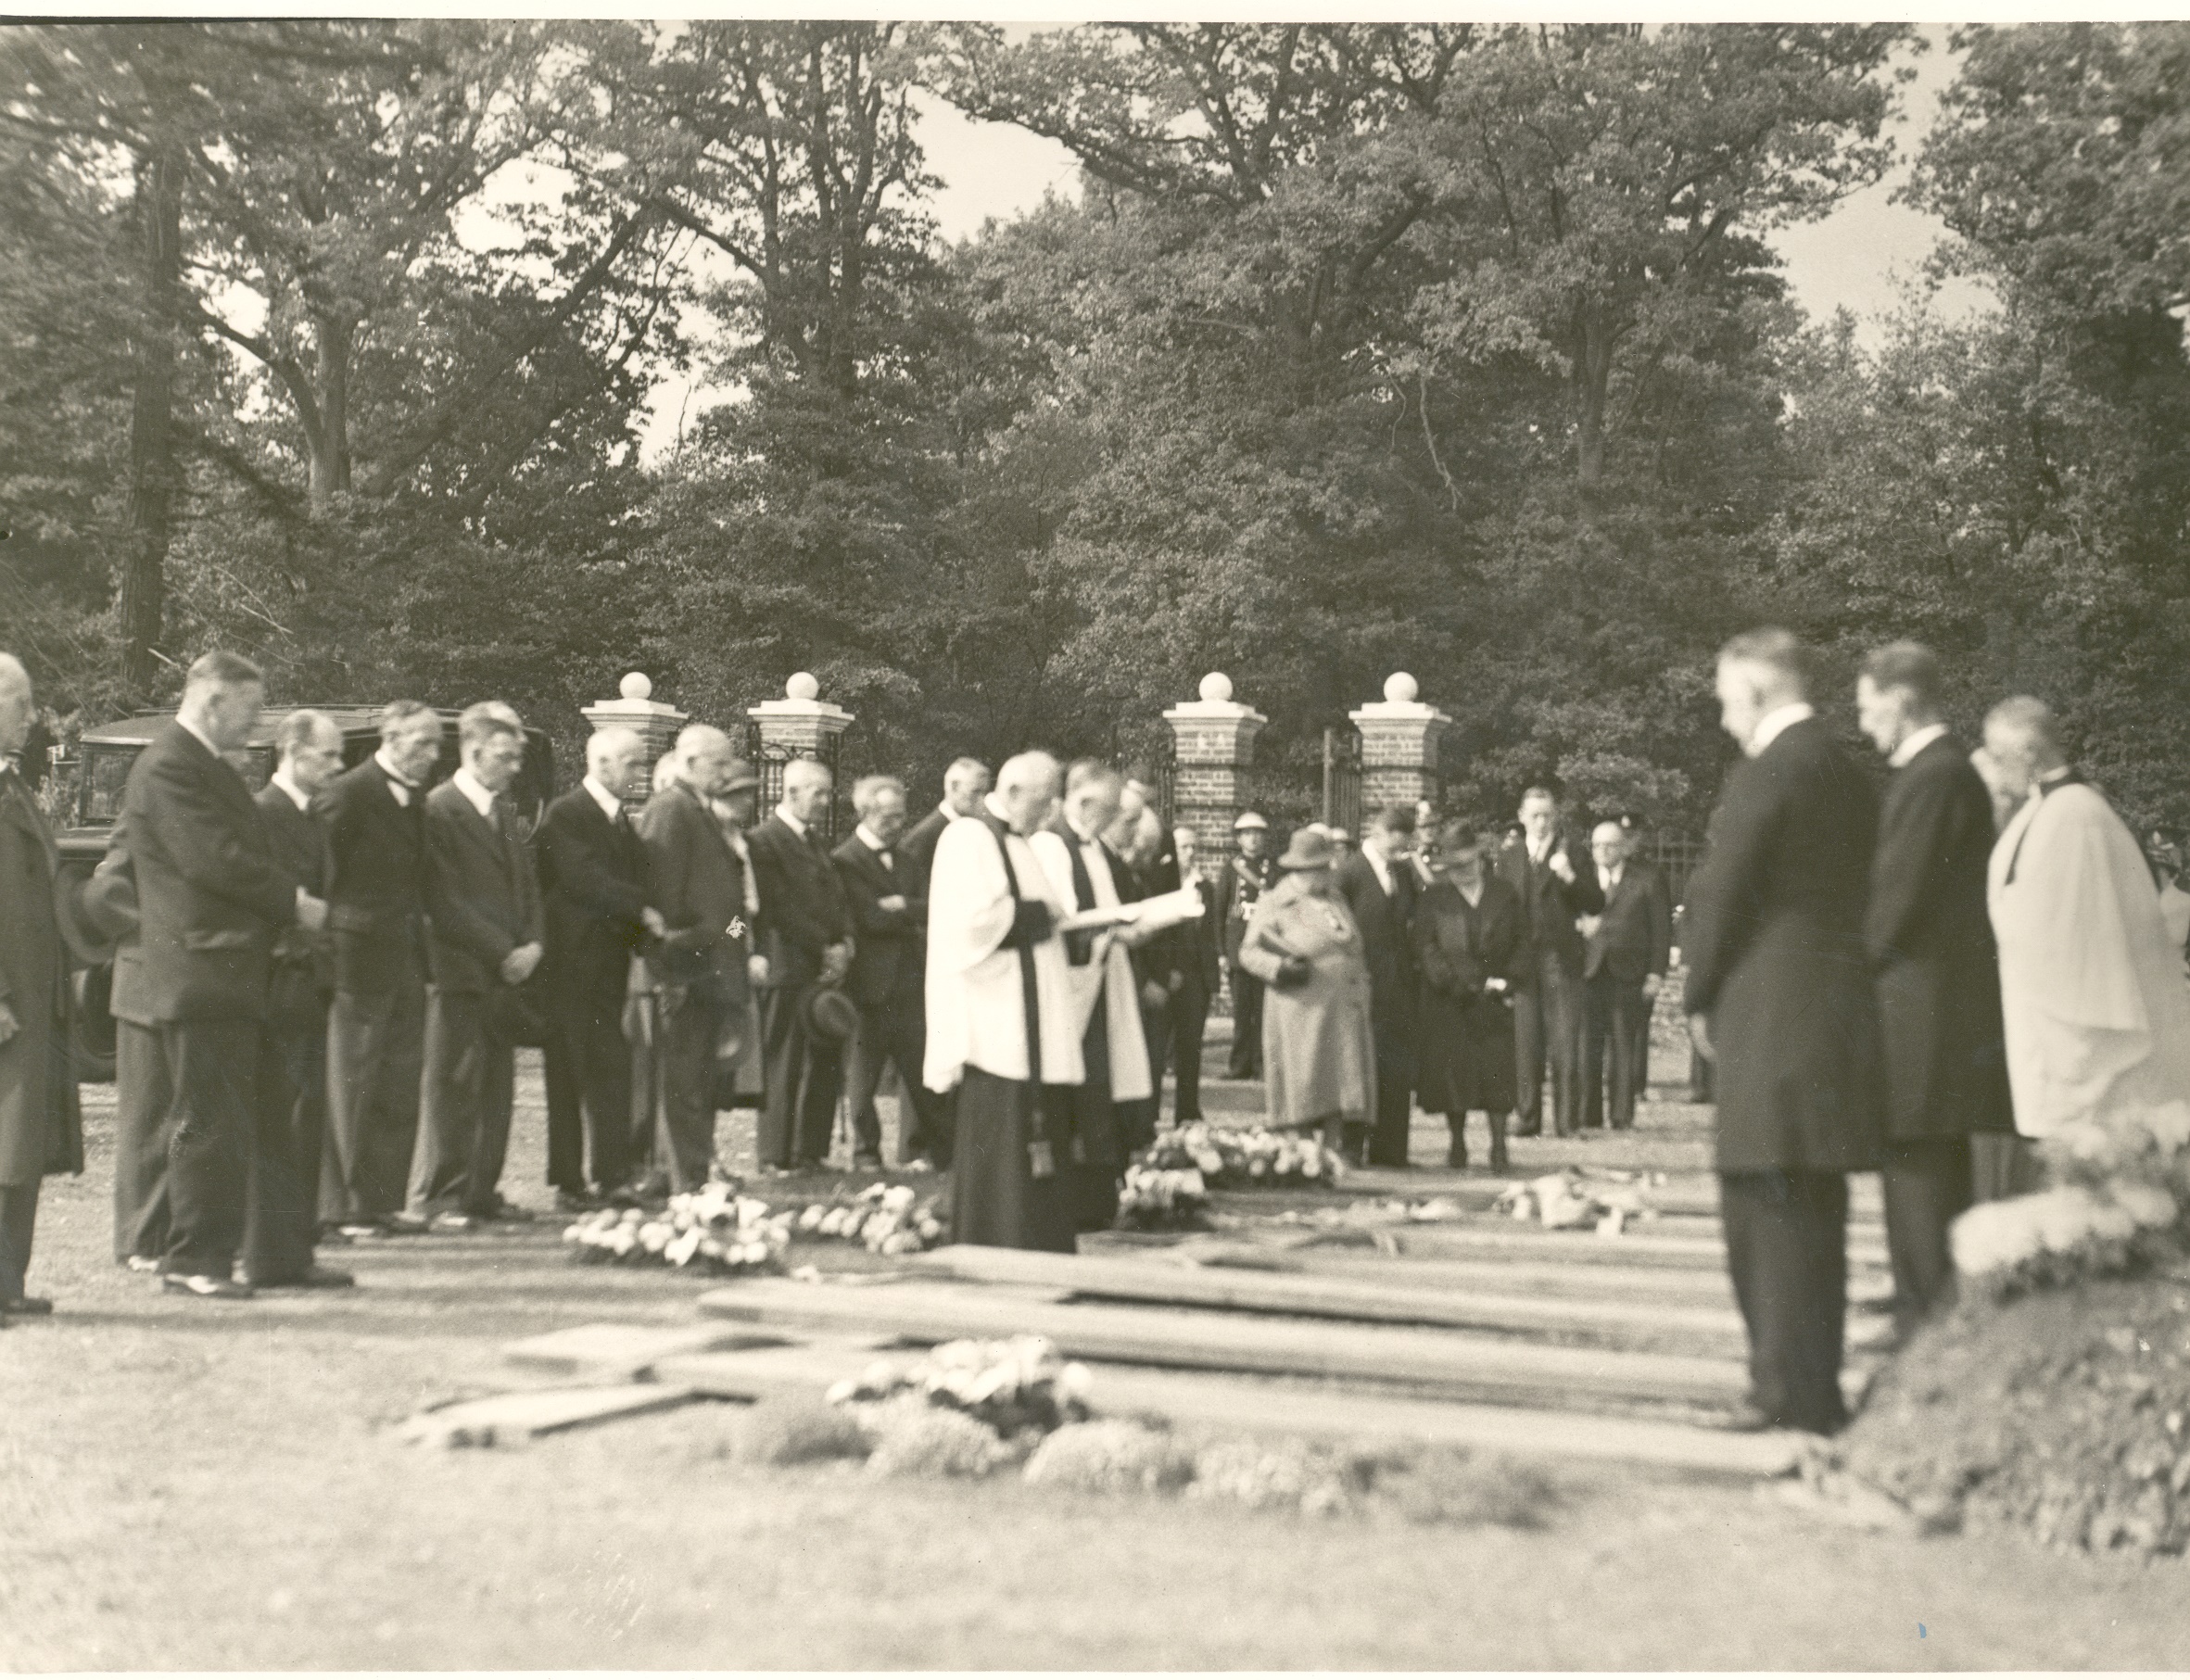 Image of a funeral for casualties of the Air Raid at Vickers-Armstrongs Ltd, Brooklands in 1940.